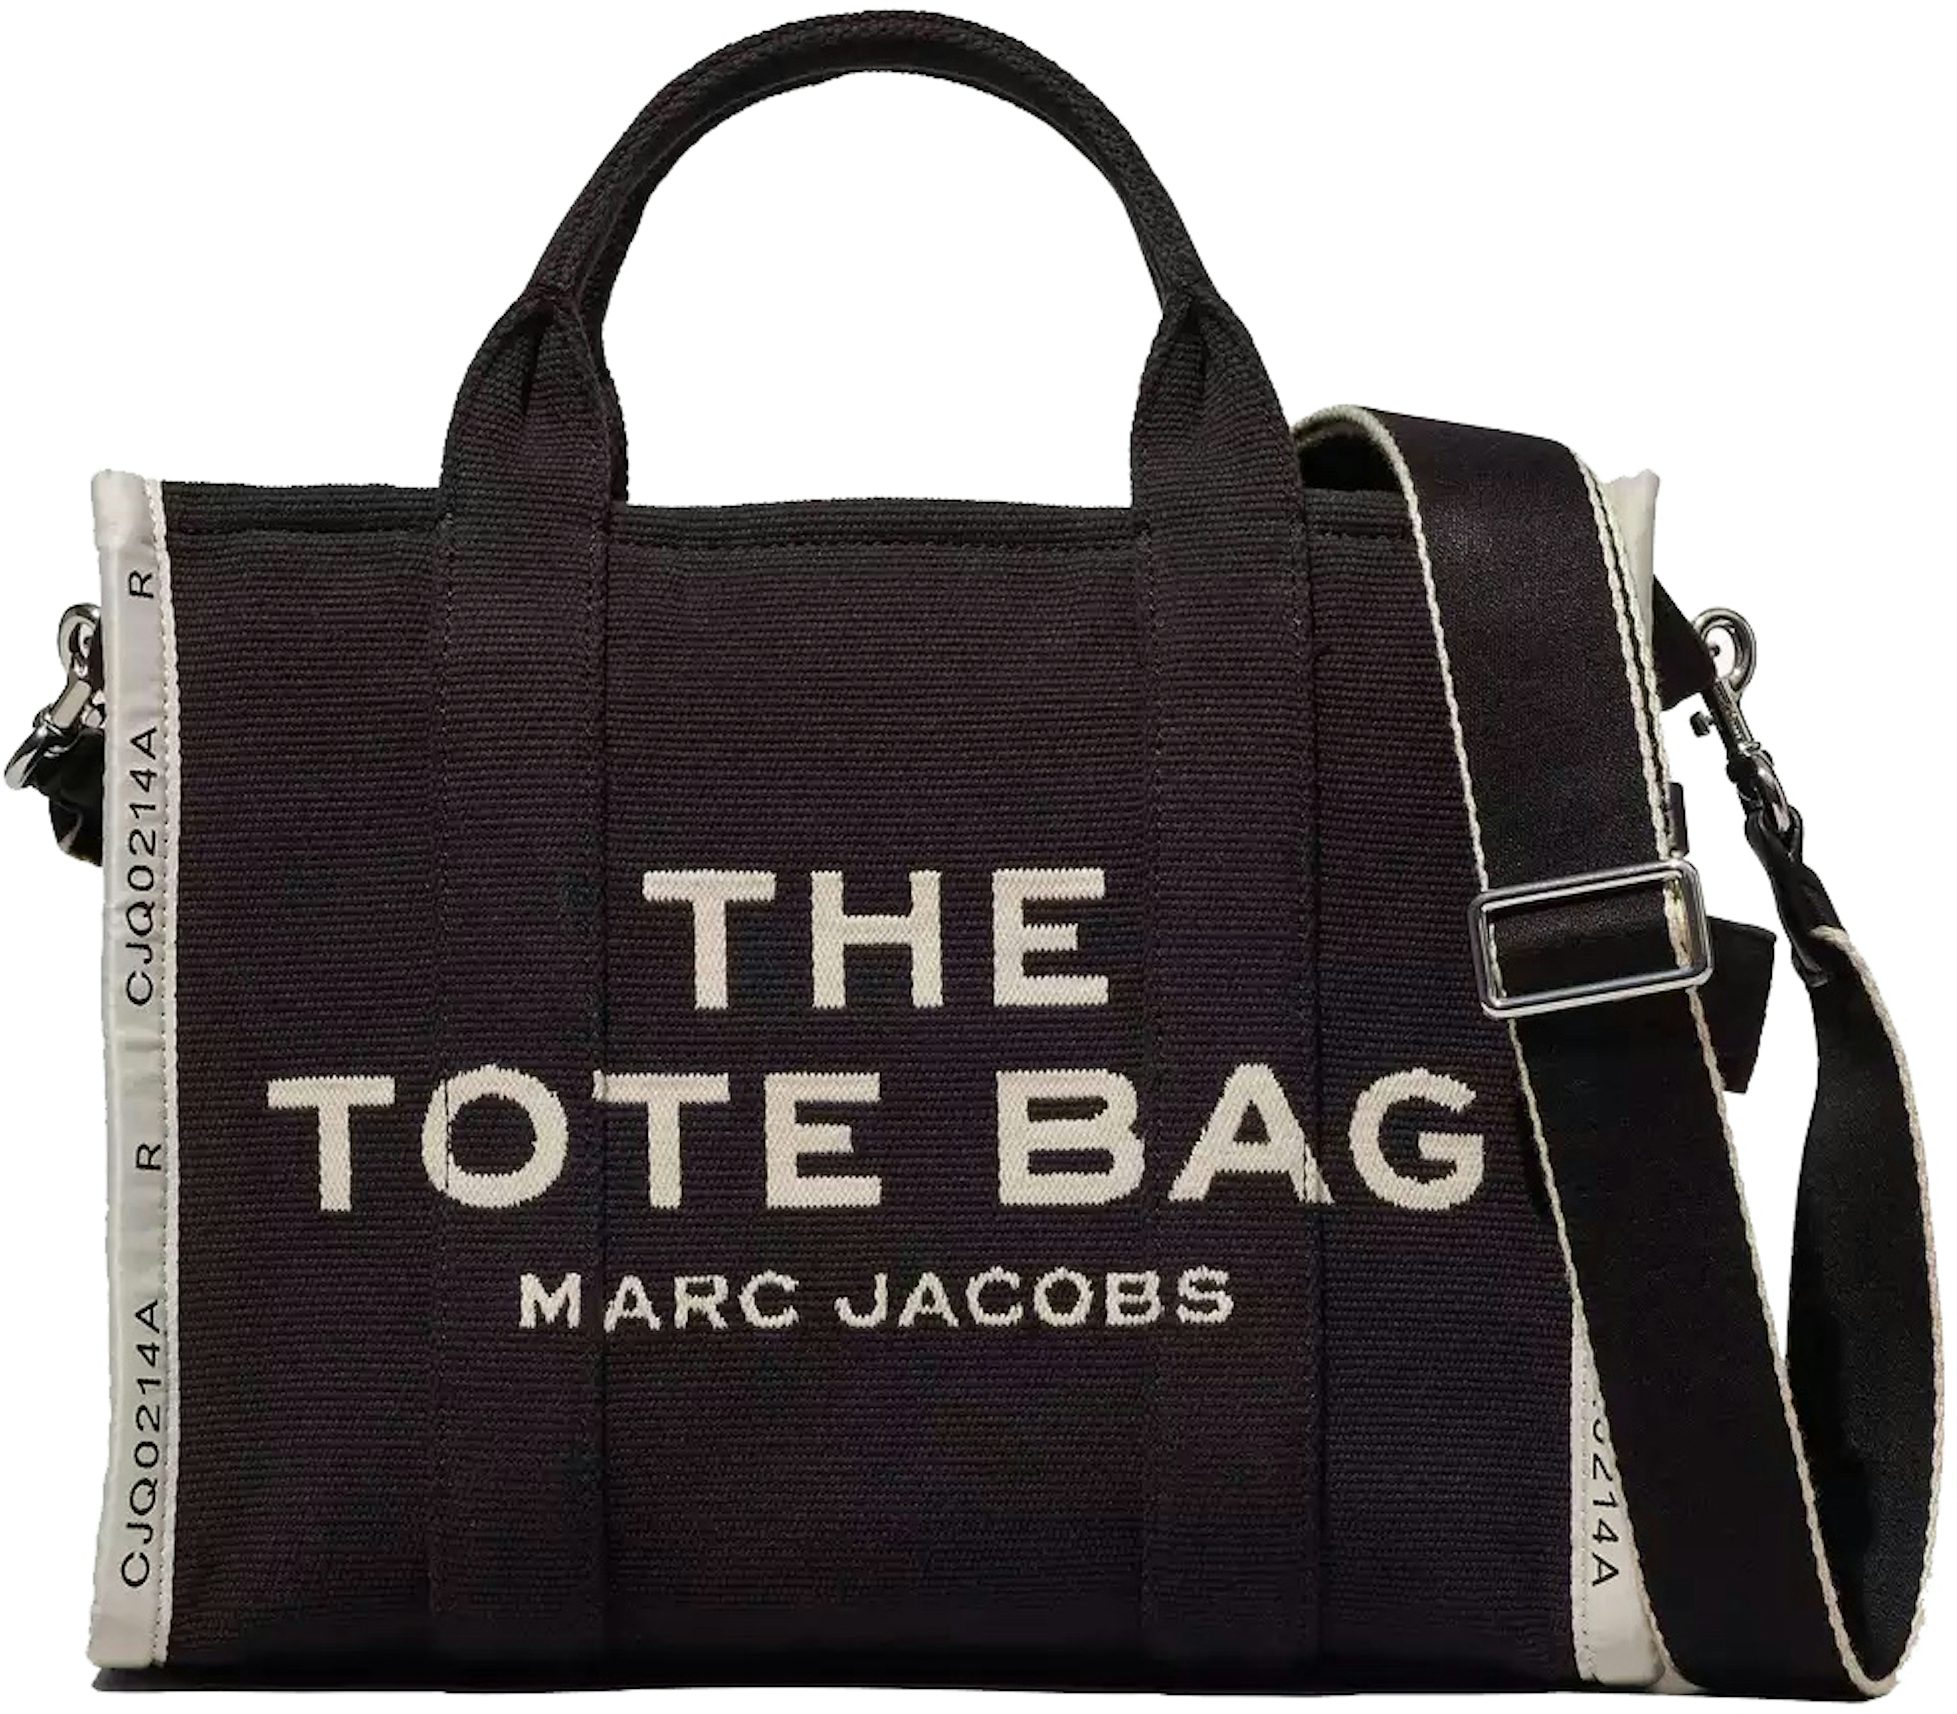 Marc Jacobs is a material boy - The Face